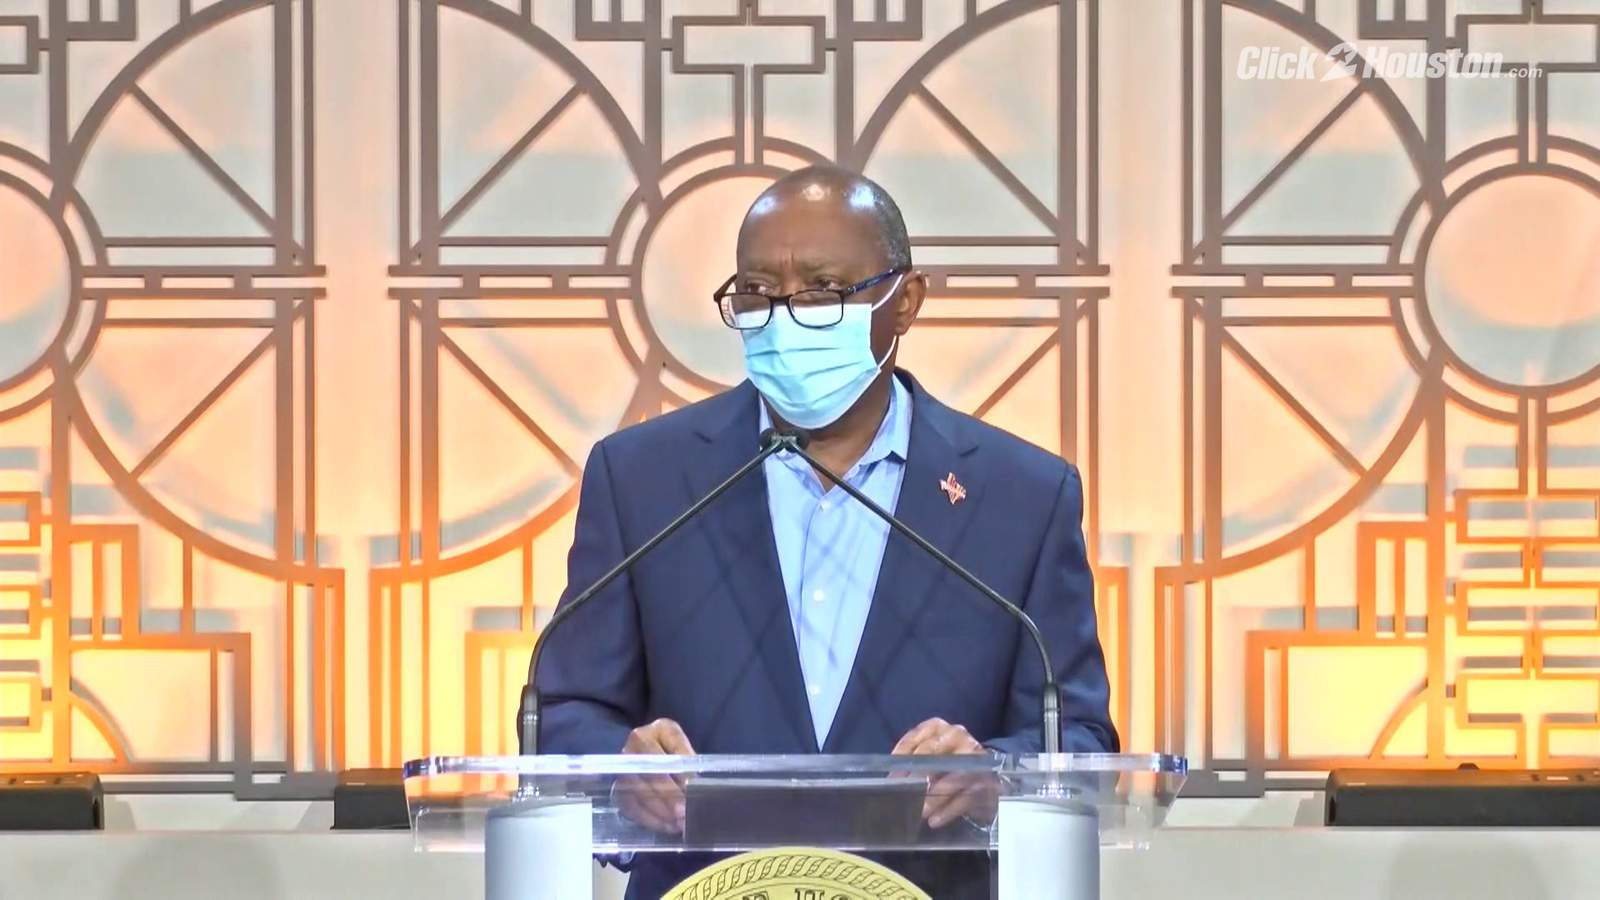 Mayor Turner gives latest update on COVID-19 pandemic, answers questions regarding protests